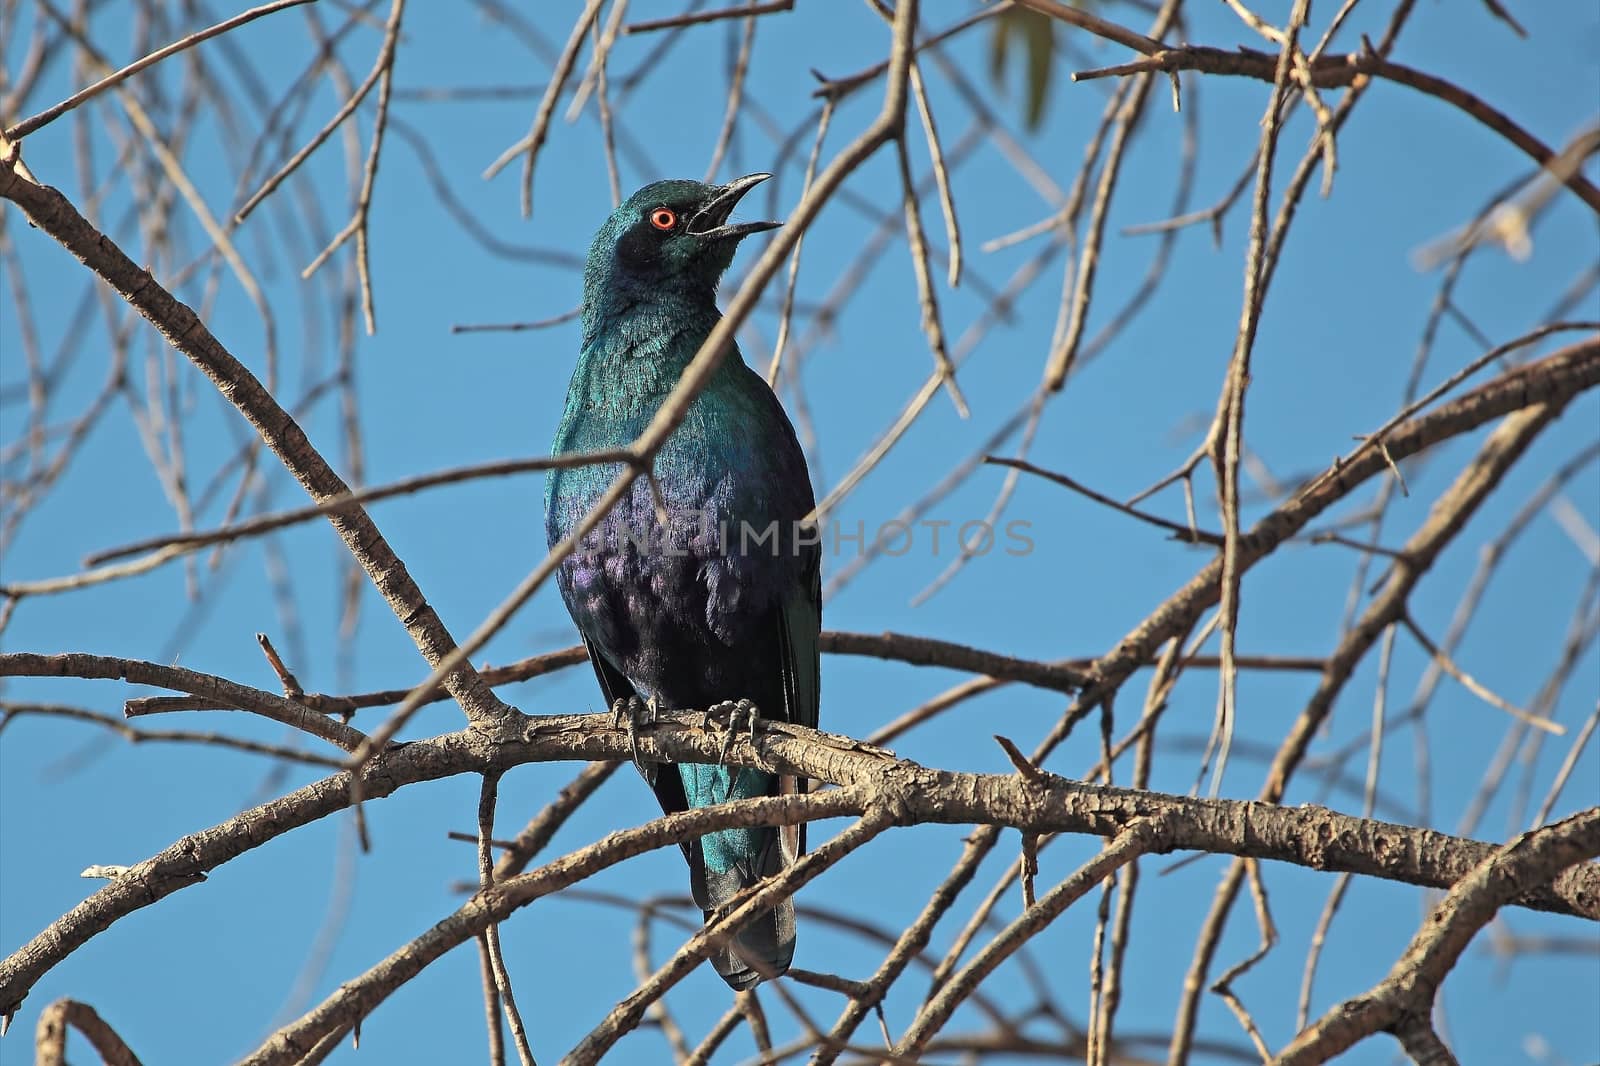 Greater Blue-eared Glossy-Starling (Lamprotornis chalybaeus) by CWeiss